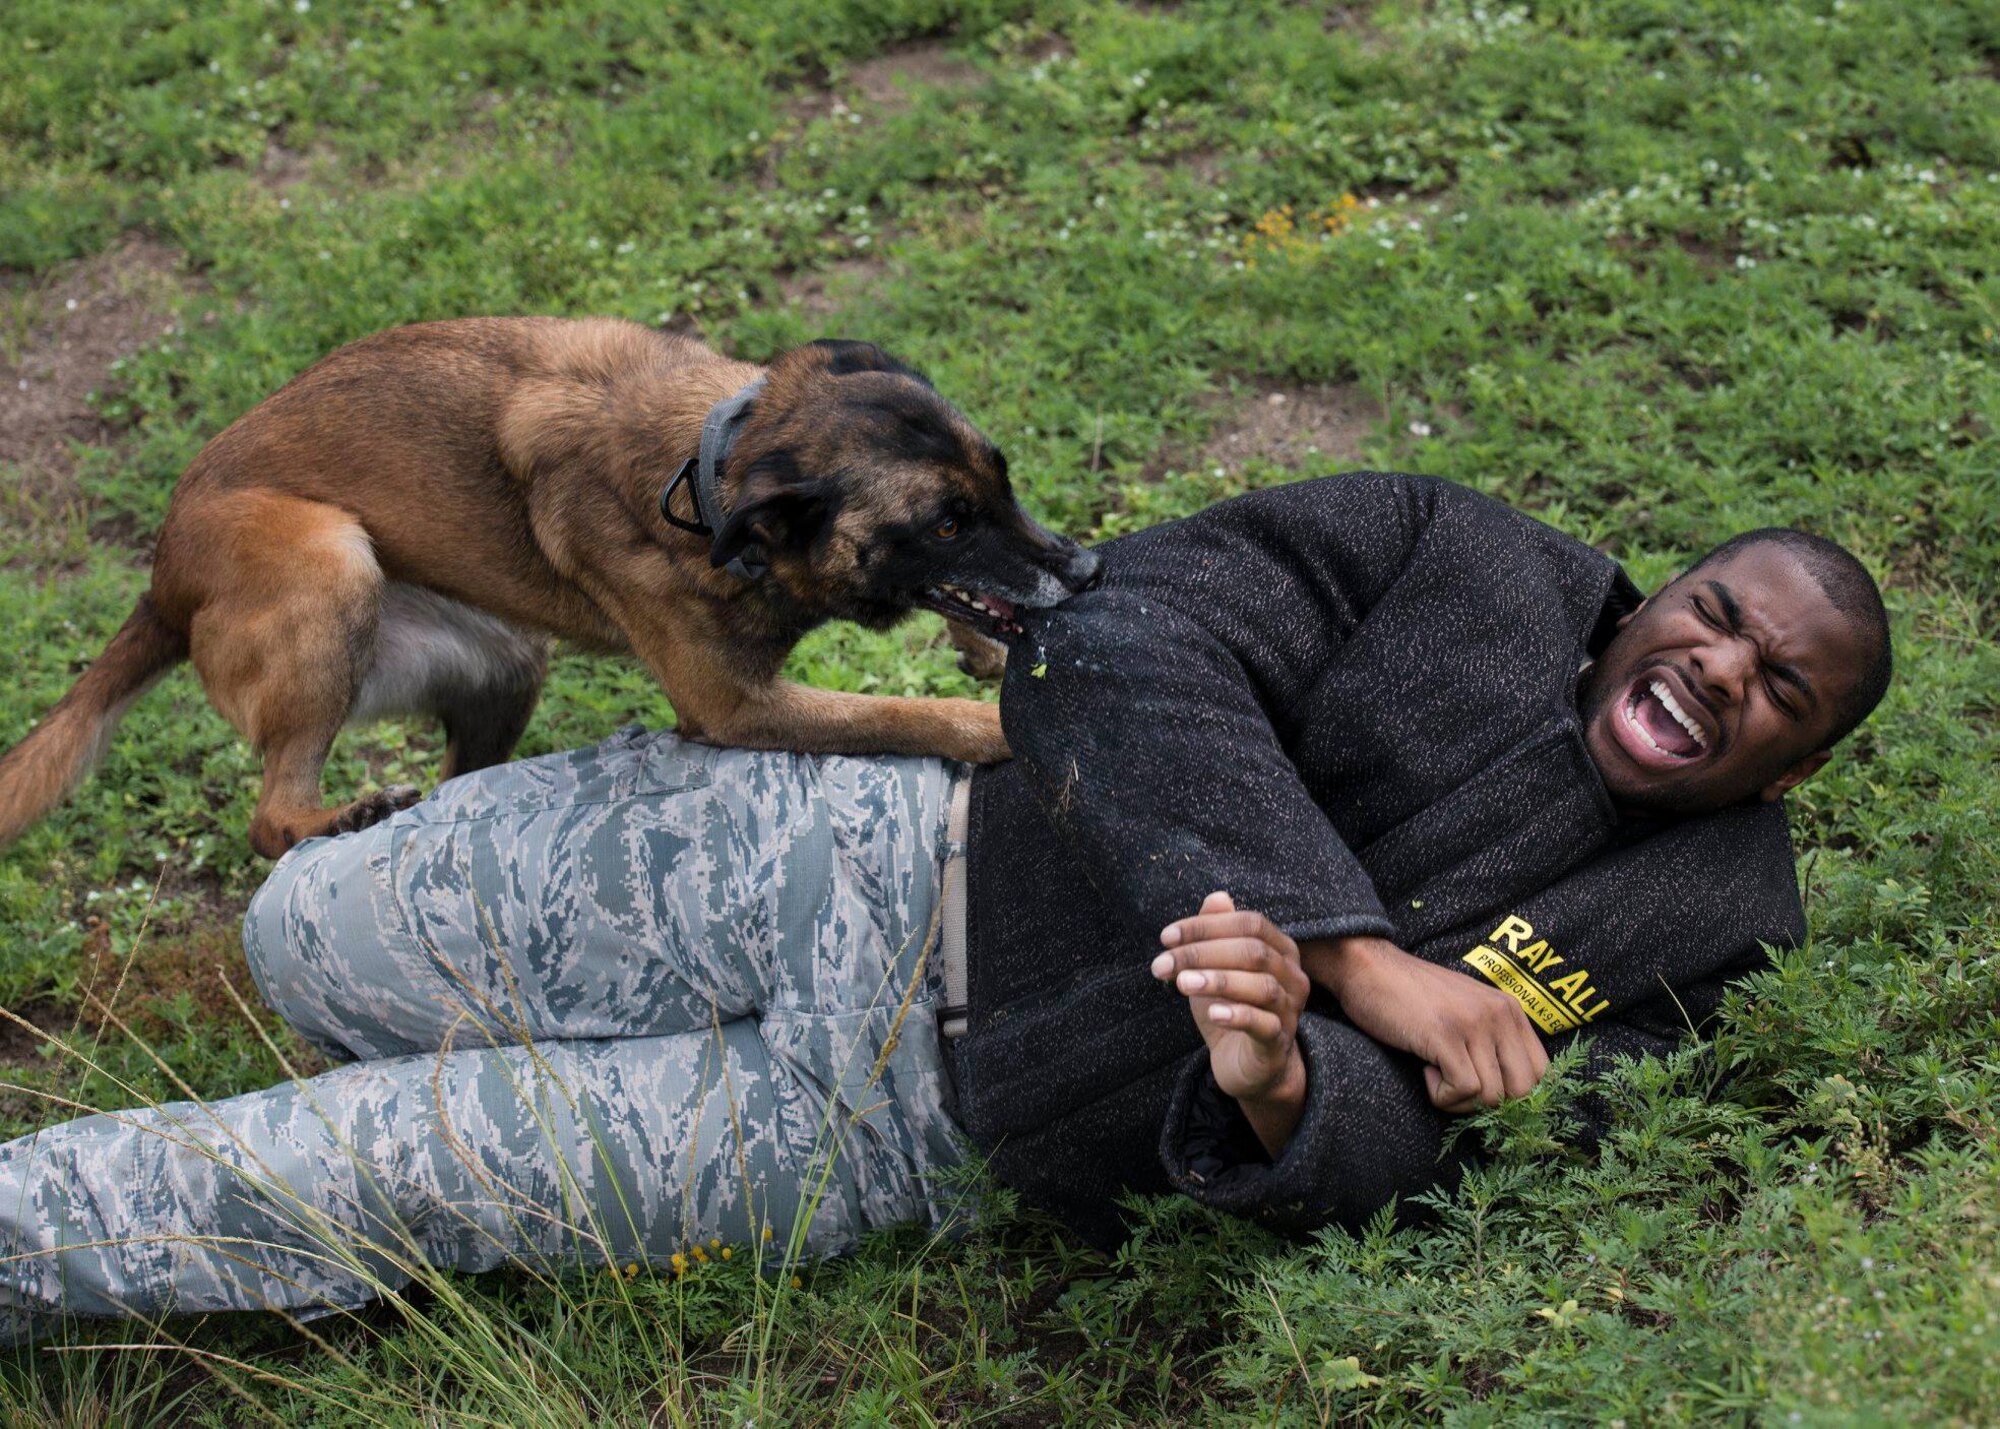 Senior Airman Ryan Harris, 96th Security Forces Squadron K9 handler, takes part in a training exercise for Caro, 96th SFS military working dog, Aug. 21, 2018, at Eglin Air Force Base, Fla. MWDs are trained to detect explosives and drugs, perform attacking tactics, patrol bases and deploy overseas with their handlers. (U.S. Air Force photo by Airman 1st Class Emily Smallwood)